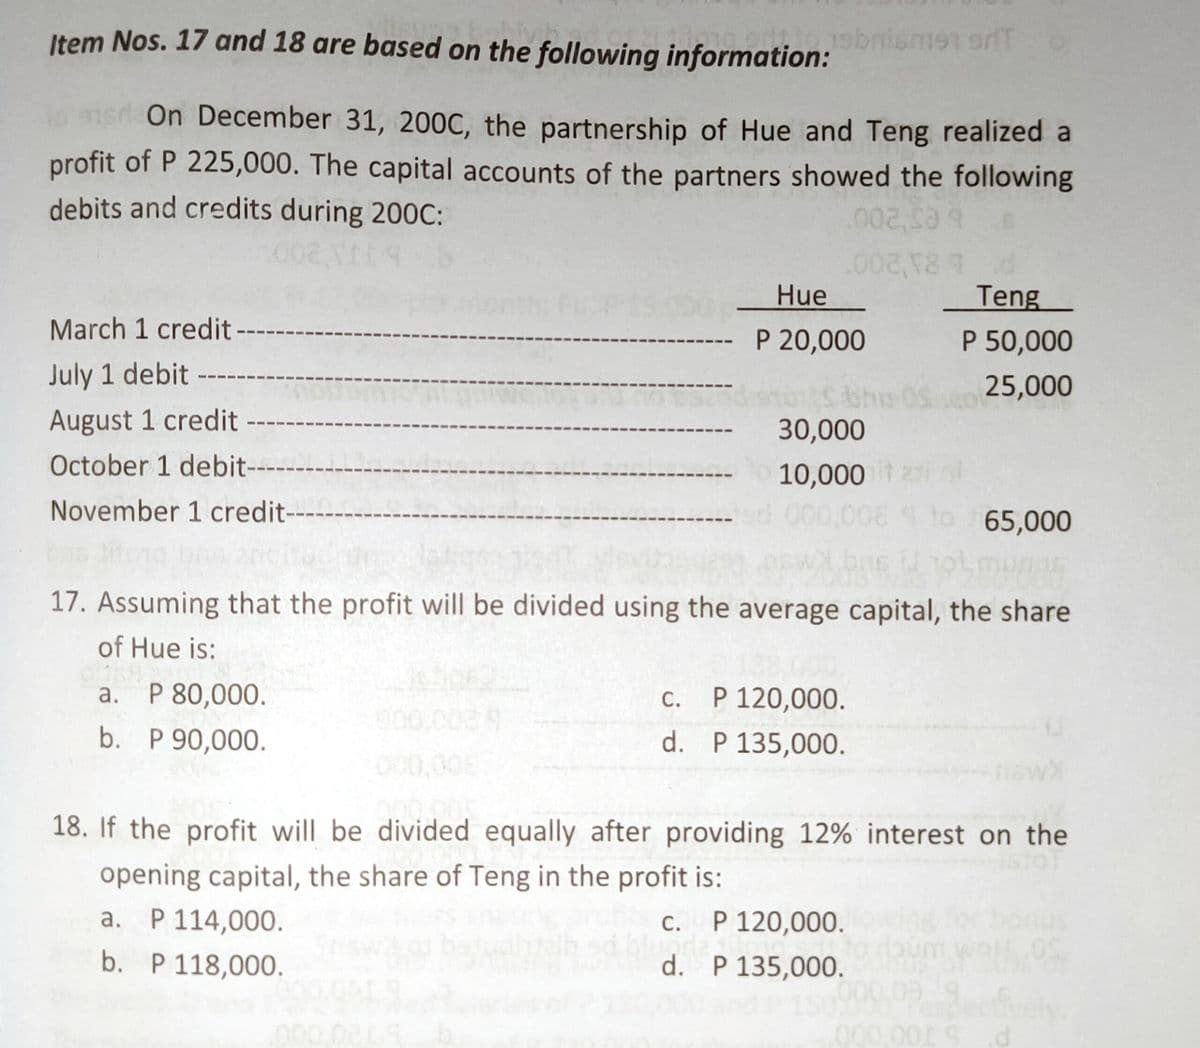 Item Nos. 17 and 18 are based on the following information:
ebnismen orfT
On December 31, 200C, the partnership of Hue and Teng realized a
profit of P 225,000. The capital accounts of the partners showed the following
debits and credits during 200C:
002
bes'200
Hue
Teng
March 1 credit
P 20,000
P 50,000
July 1 debit
5411
25,000
August 1 credit
30,000
October 1 debit-
10,000
November 1 credit-
65,000
17. Assuming that the profit will be divided using the average capital, the share
of Hue is:
a. P 80,000.
c. P 120,000.
d. P 135,000.
а.
С.
b. P 90,000.
000,008
nsw
18. If the profit will be divided equally after providing 12% interest on the
opening capital, the share of Teng in the profit is:
a. P 114,000.
P 120,000.
С.
b. P 118,000.
d. P 135,000.
00
000.009
